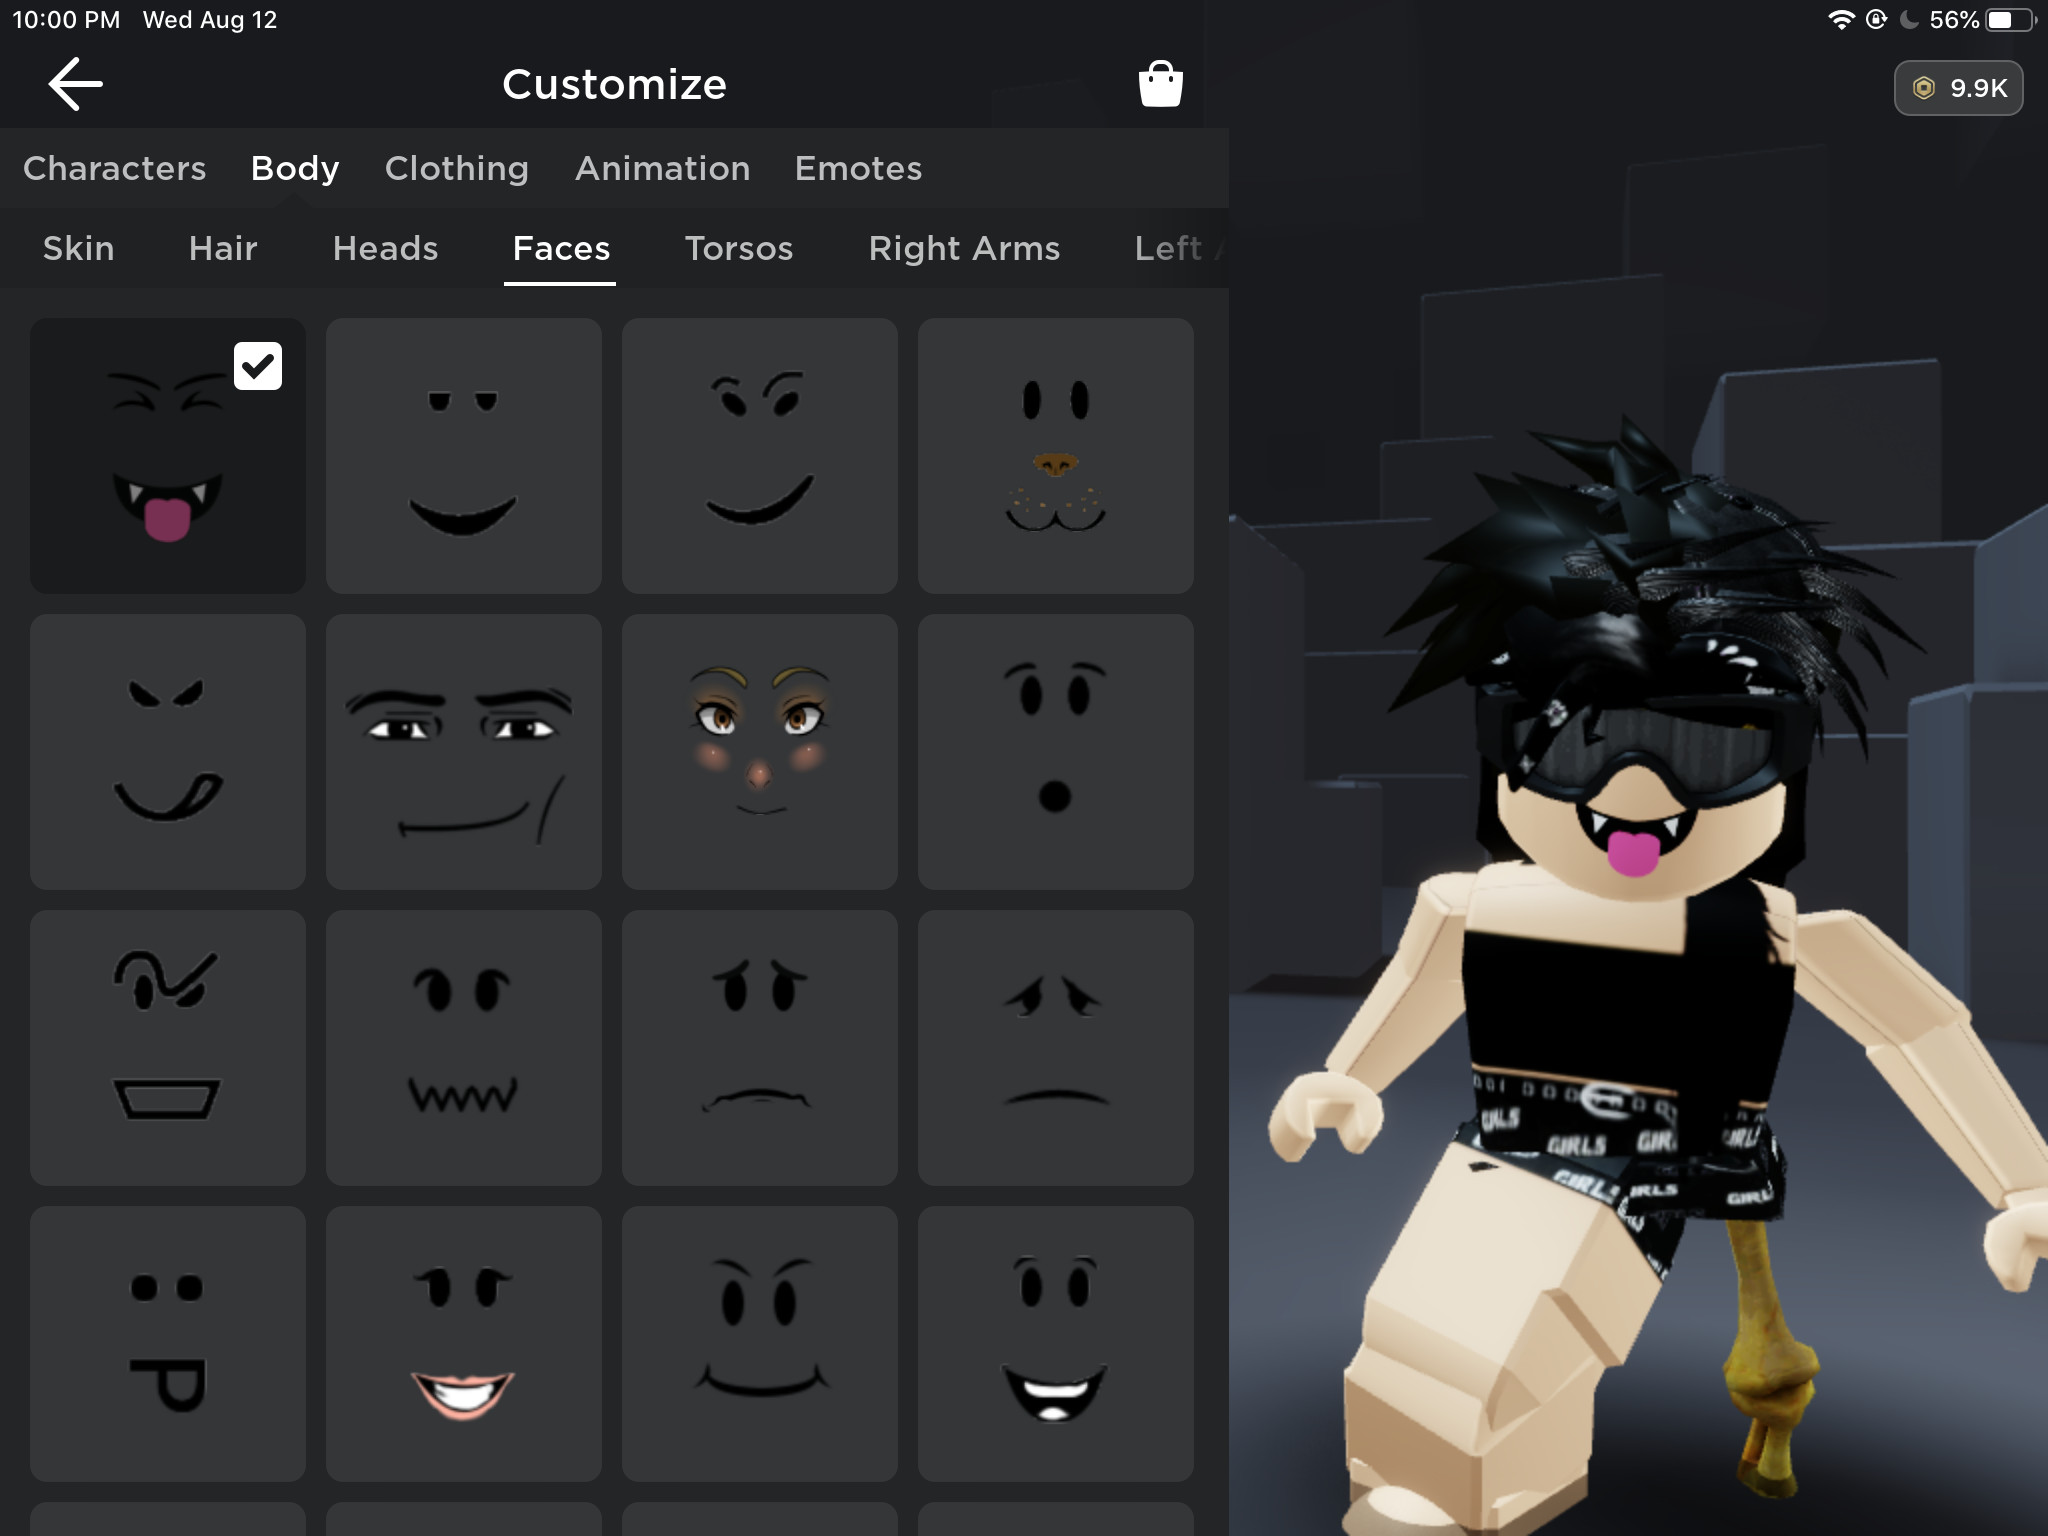 20 000 robux cost